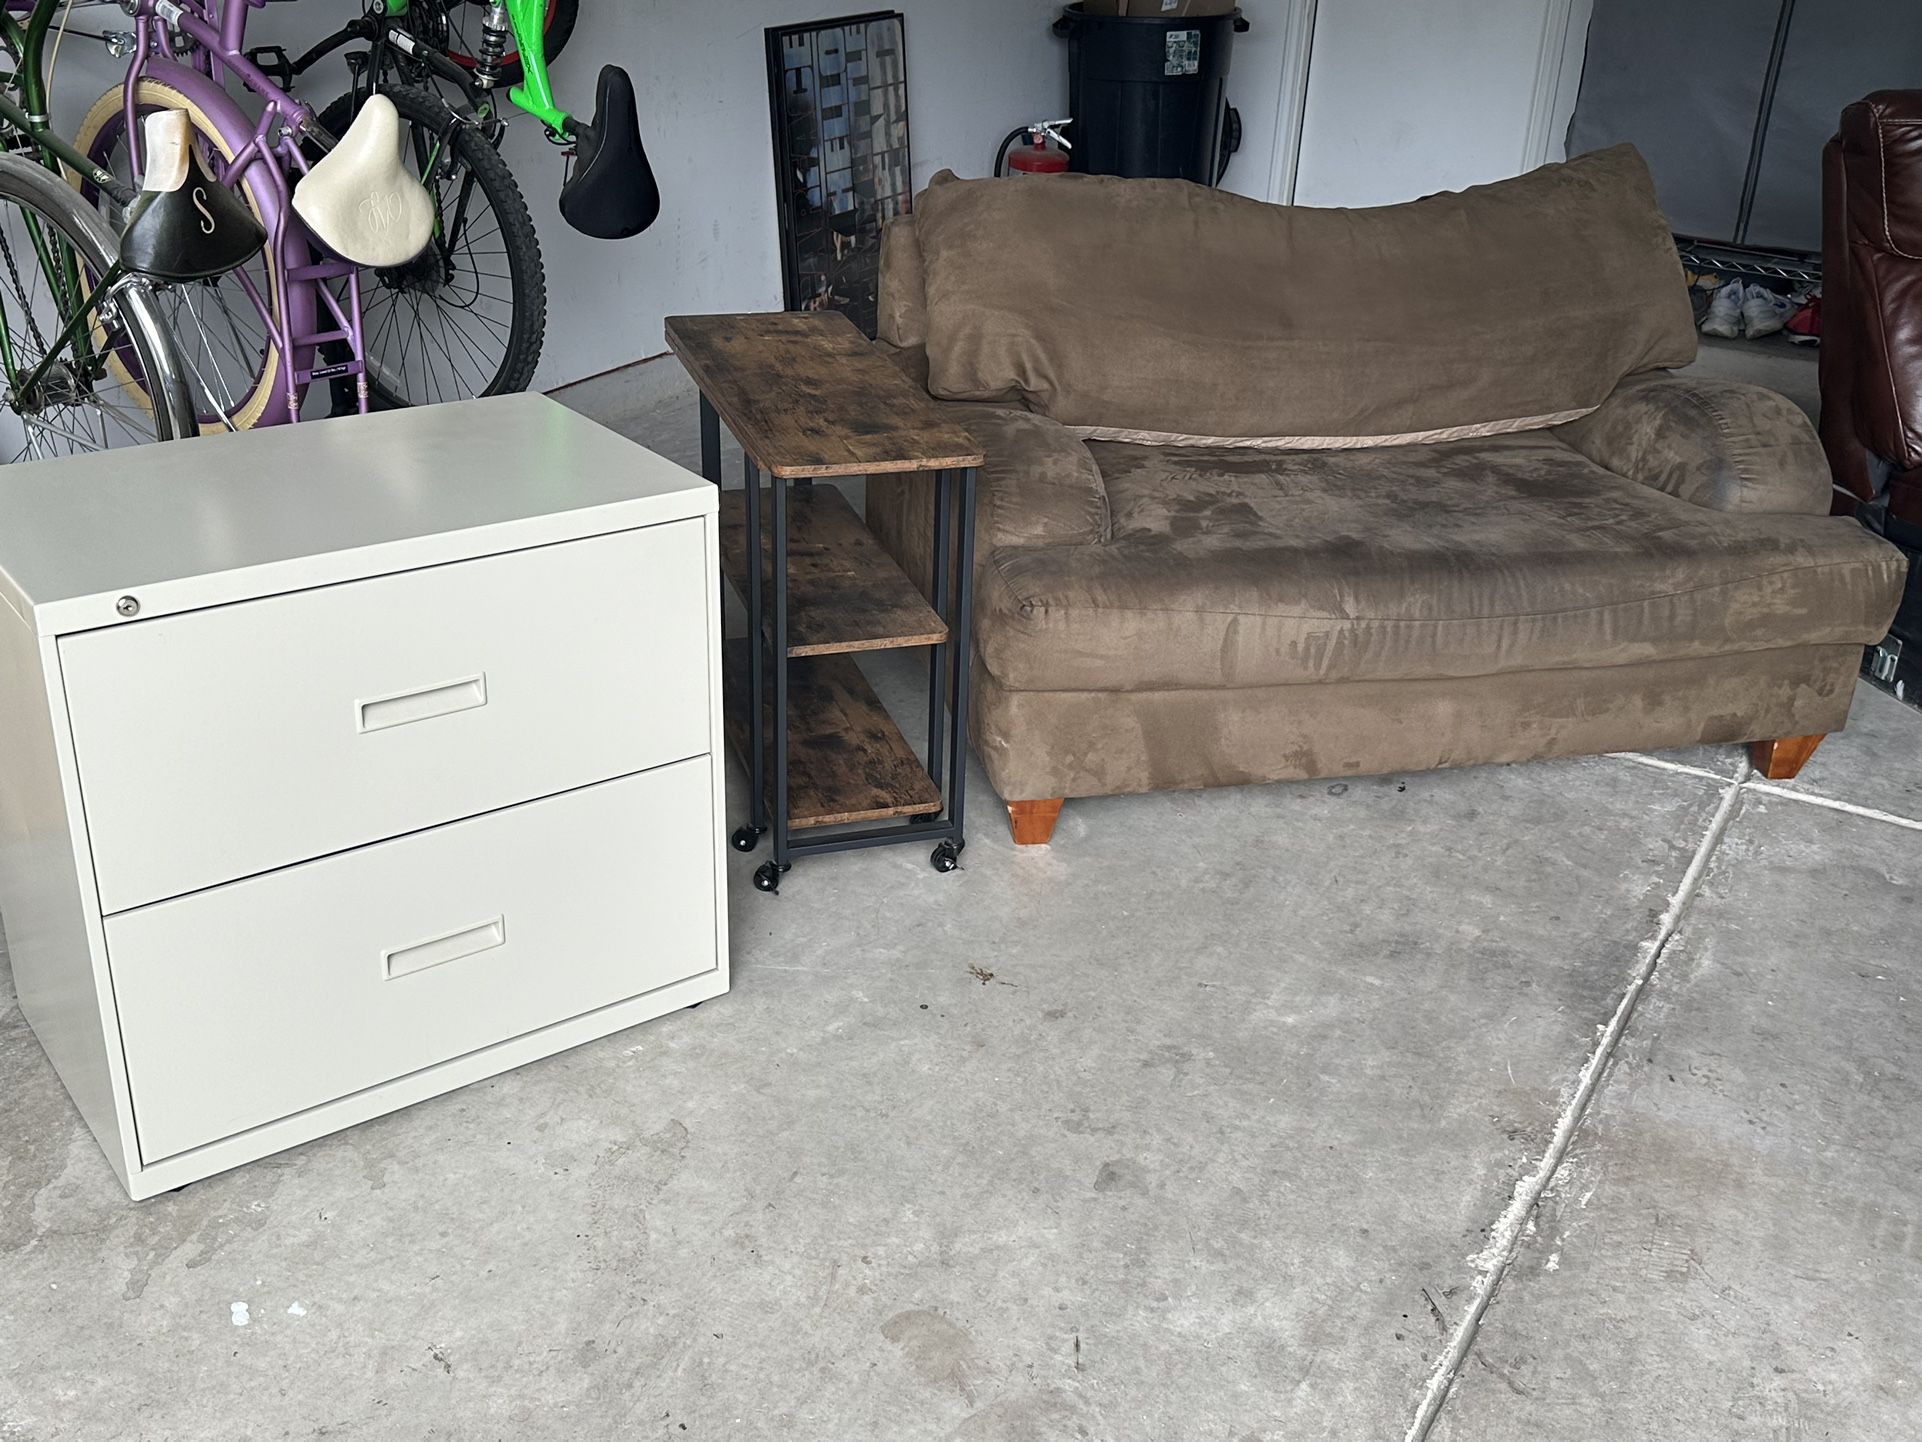 Couches, Desk, Filing Cabinet, Cork Board, End Table, 2 Shelves